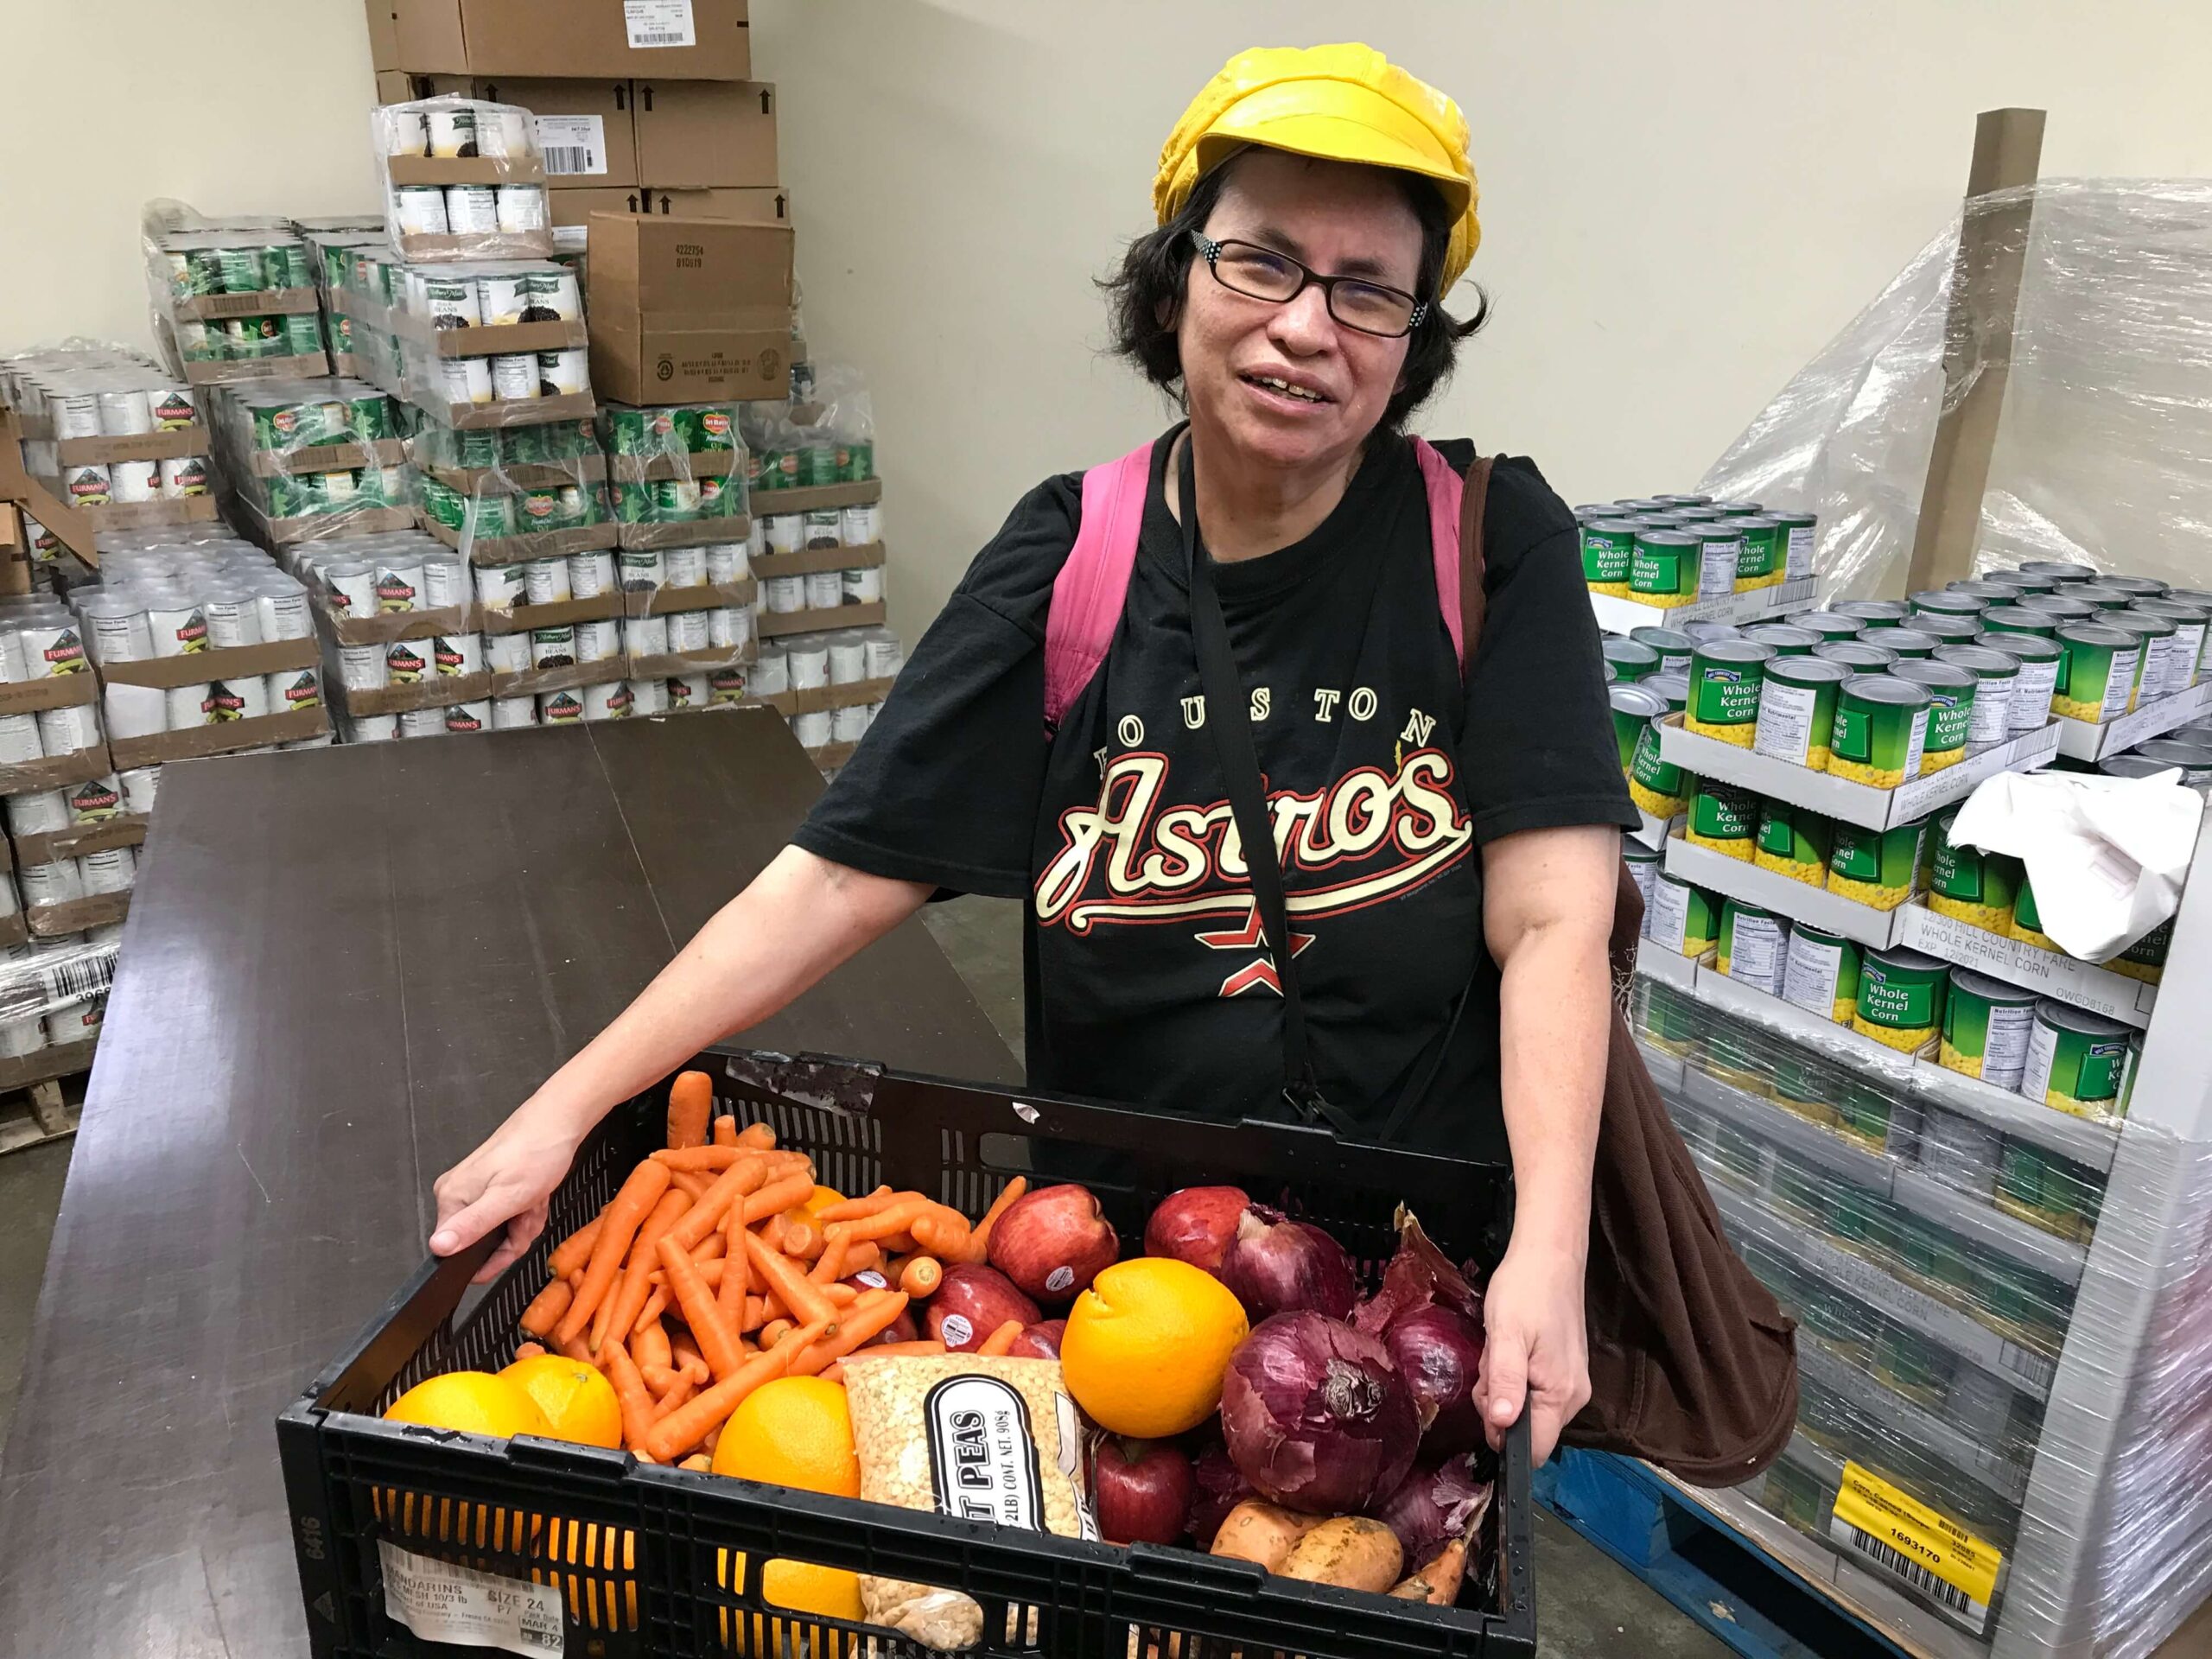 You help people like Mary get enough to eat through Catholic Charities' Family Assistance Program.